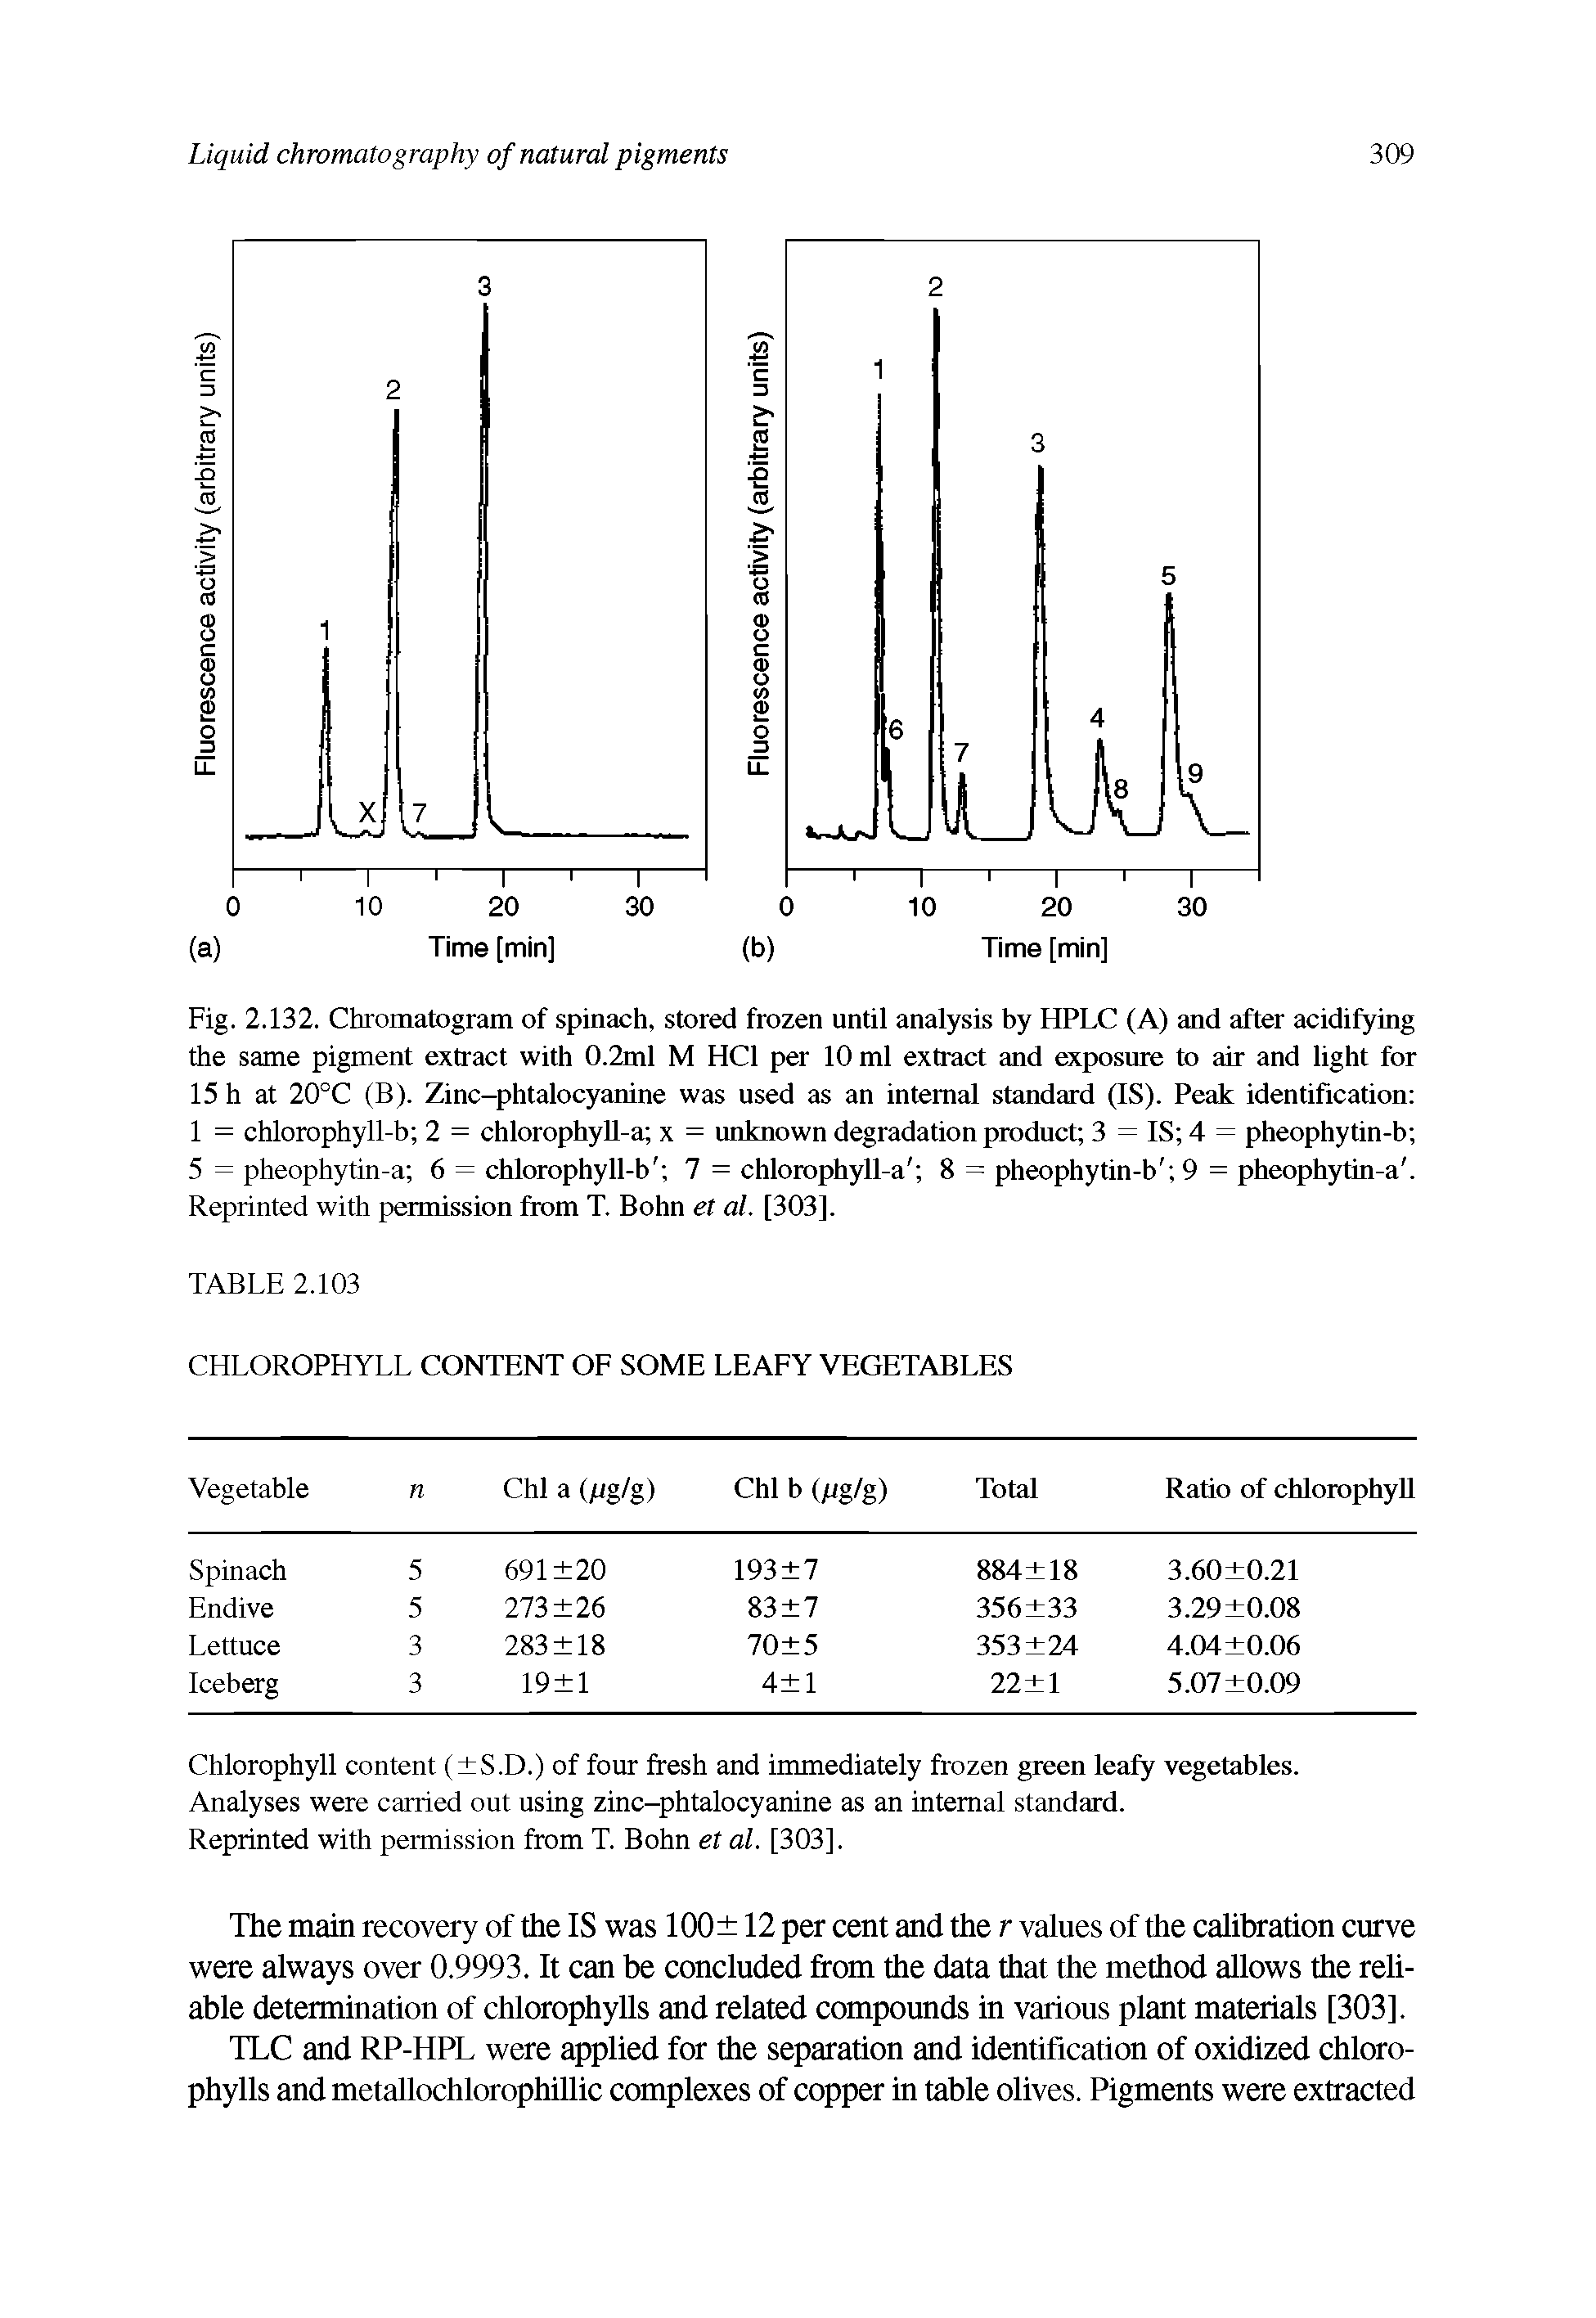 Fig. 2.132. Chromatogram of spinach, stored frozen until analysis by HPLC (A) and after acidifying the same pigment extract with 0.2ml M HC1 per 10 ml extract and exposure to air and light for 15 h at 20°C (B). Zinc-phtalocyanine was used as an internal standard (IS). Peak identification 1 = chlorophyll-b 2 = chlorophyll-a x = unknown degradation product 3 = IS 4 = pheophytin-b 5 = pheophytin-a 6 = chlorophyll-b 7 = chlorophyll-a 8 = pheophytin-b 9 = pheophytin-a. Reprinted with permission from T. Bohn et al. [303].